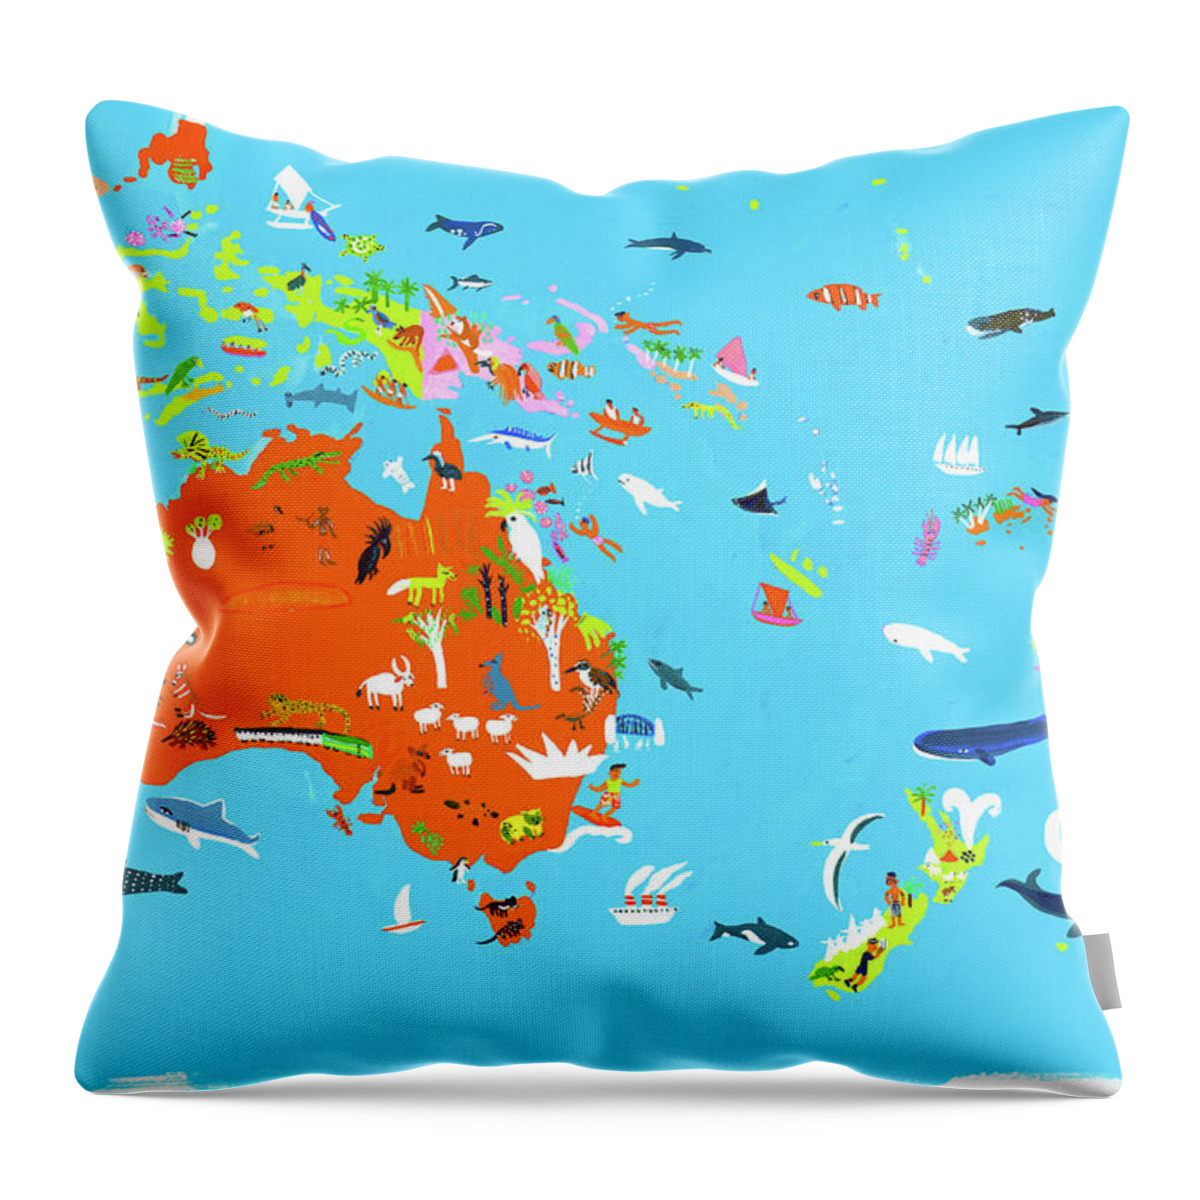 Abundance Throw Pillow featuring the photograph Illustrated Map Of Australasian by Ikon Ikon Images